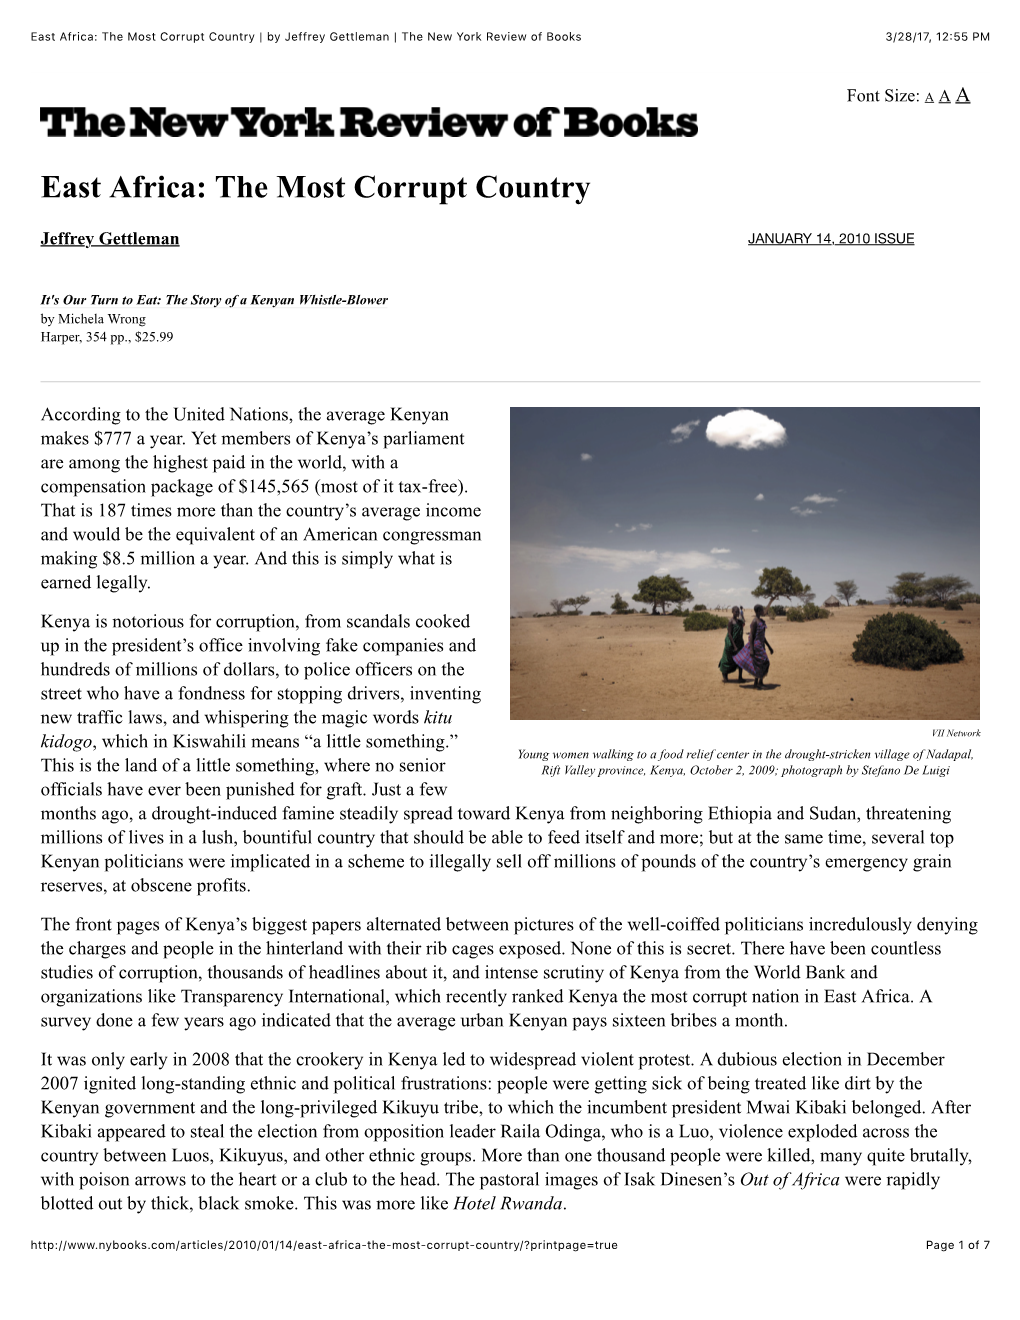 East Africa: the Most Corrupt Country | by Jeffrey Gettleman | the New York Review of Books 3/28/17, 12)55 PM